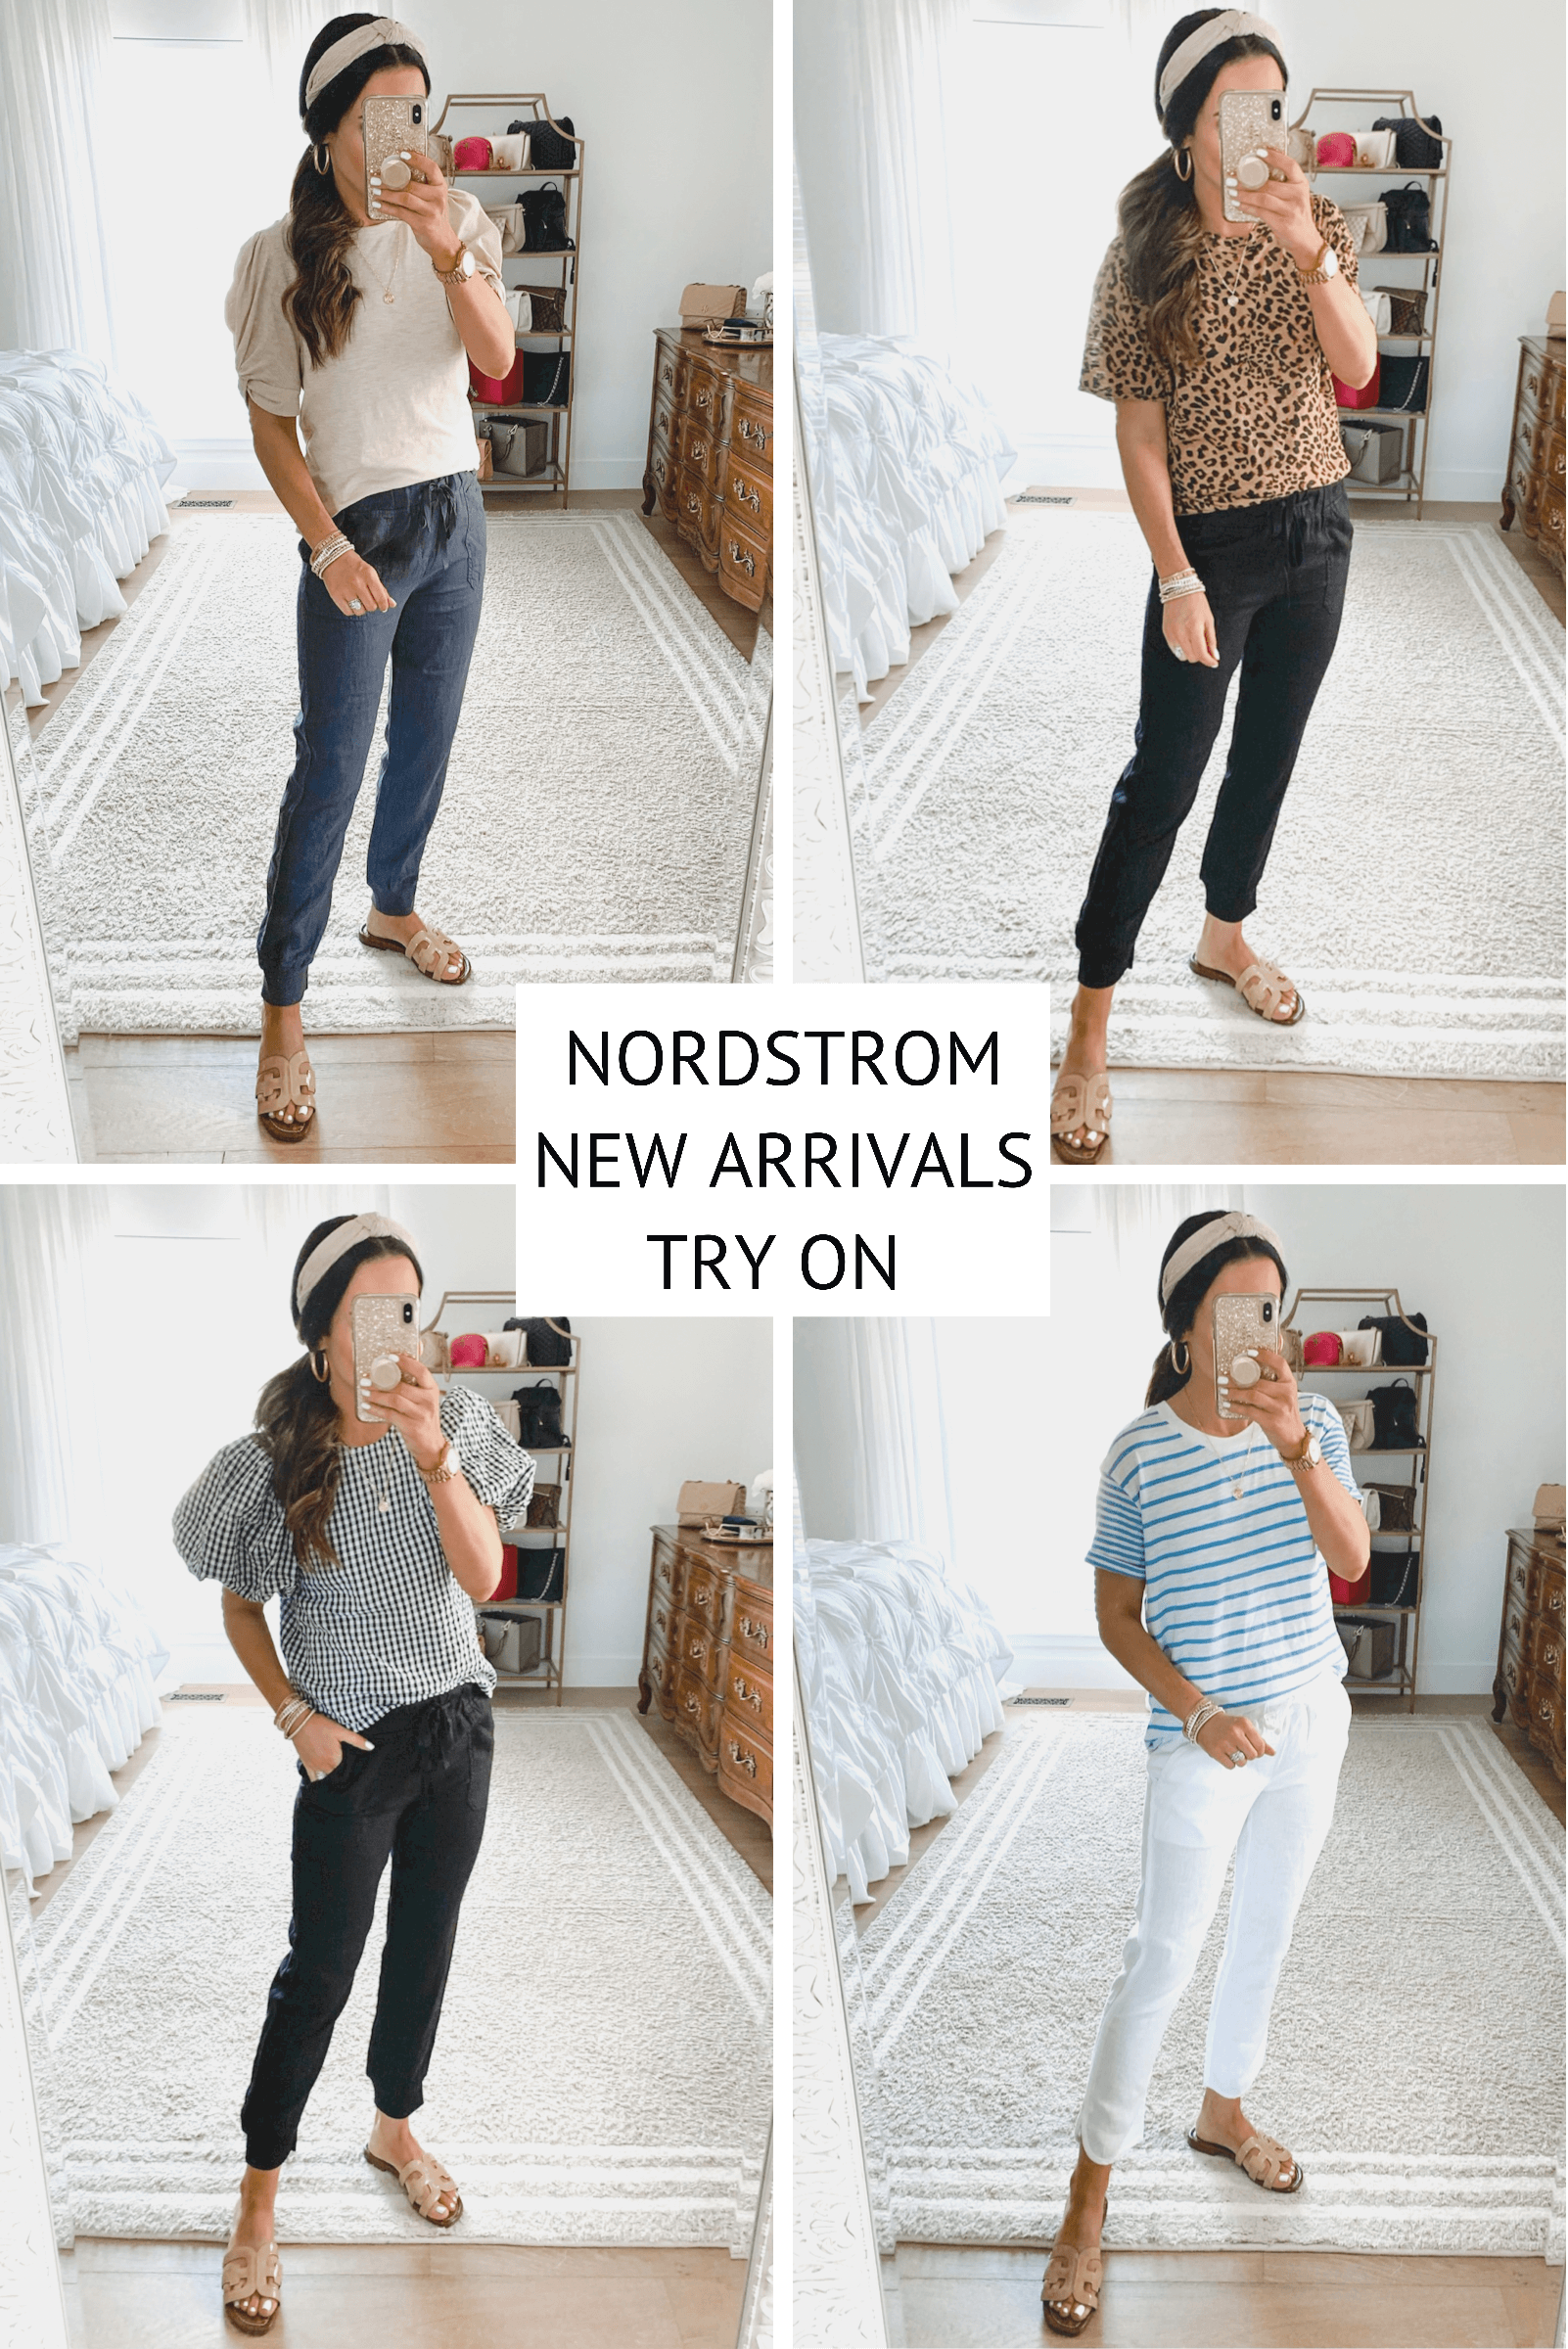 Nordstrom Rack New Arrivals Try On! - The Double Take Girls